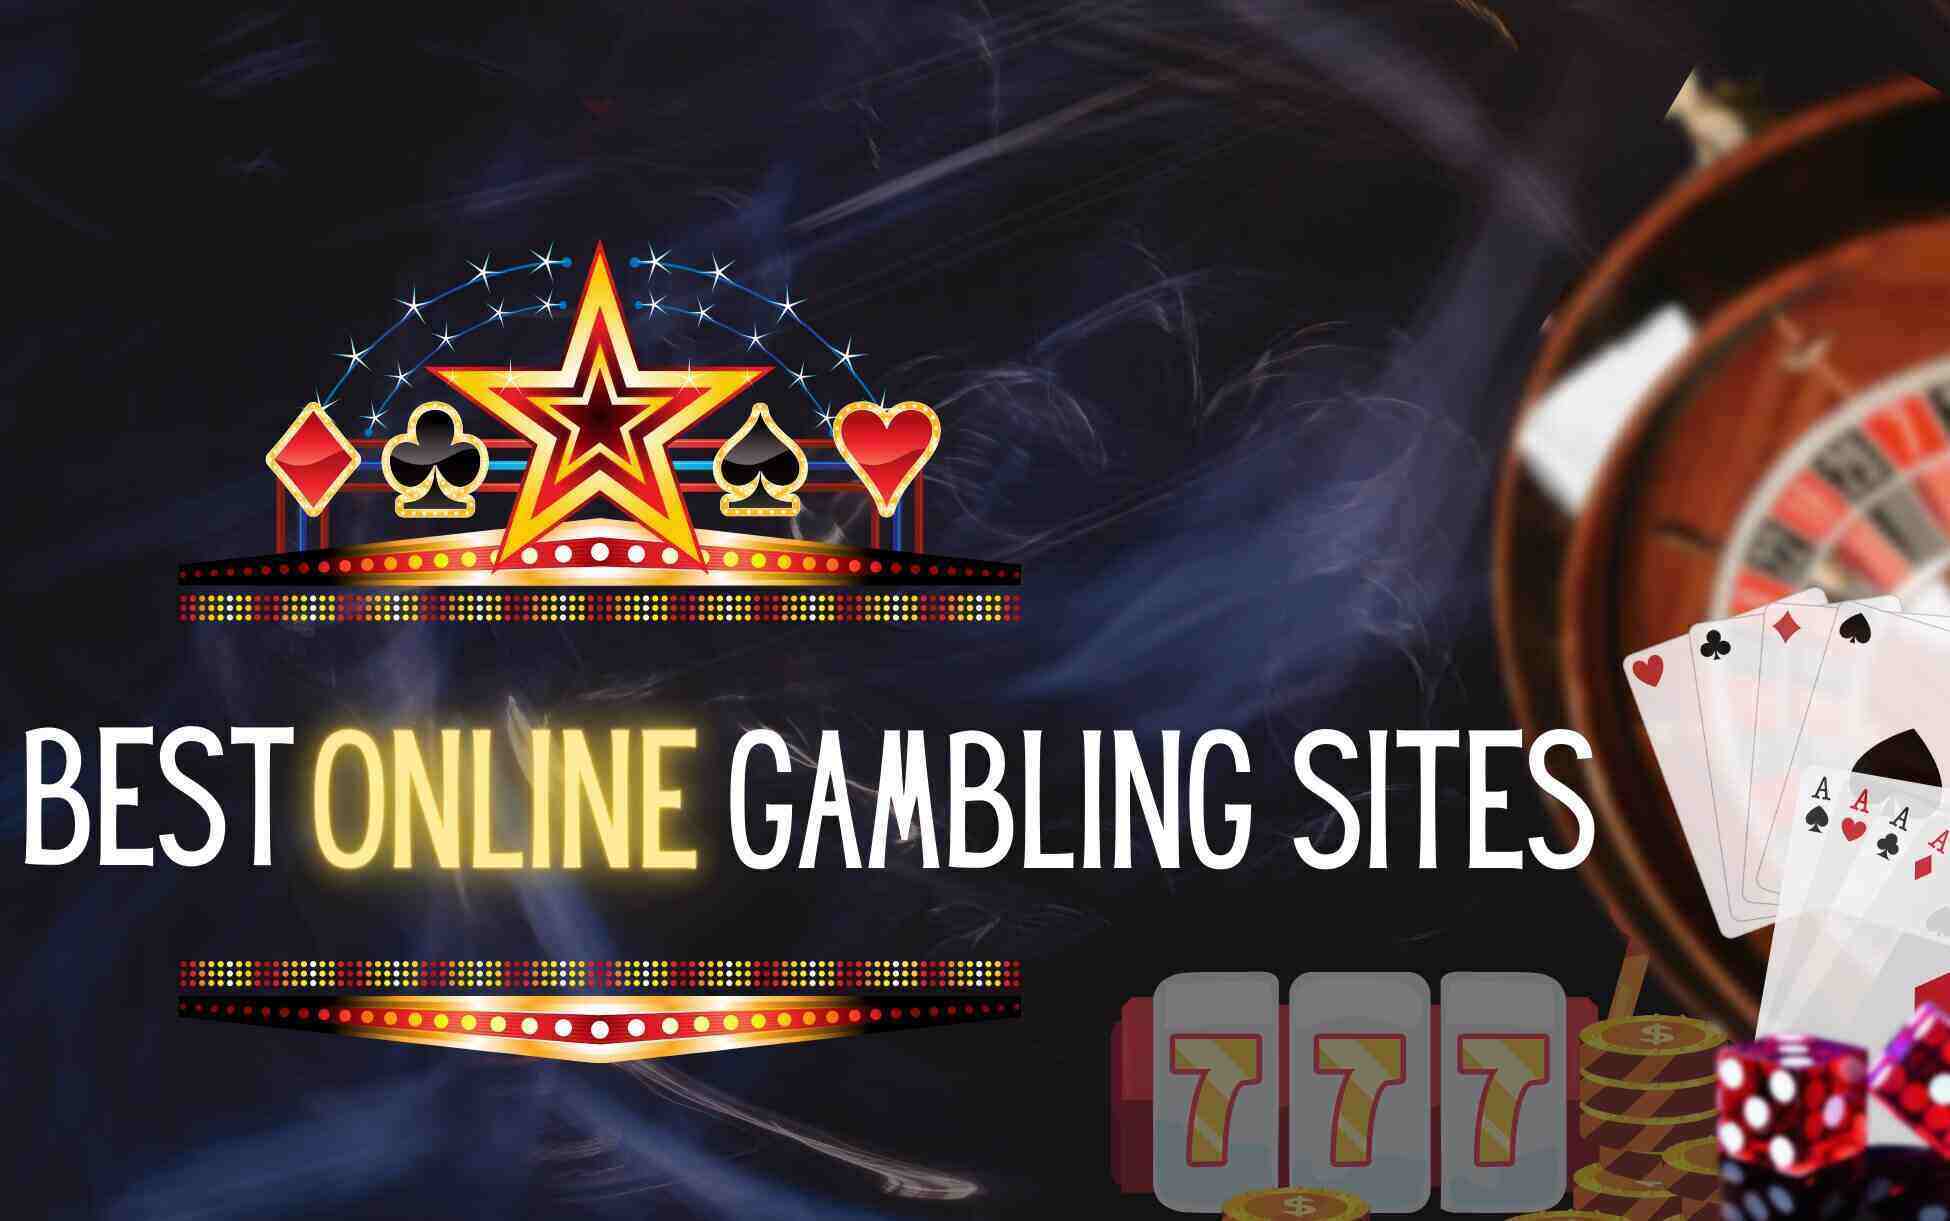 Gambling Report: Statistics and Facts